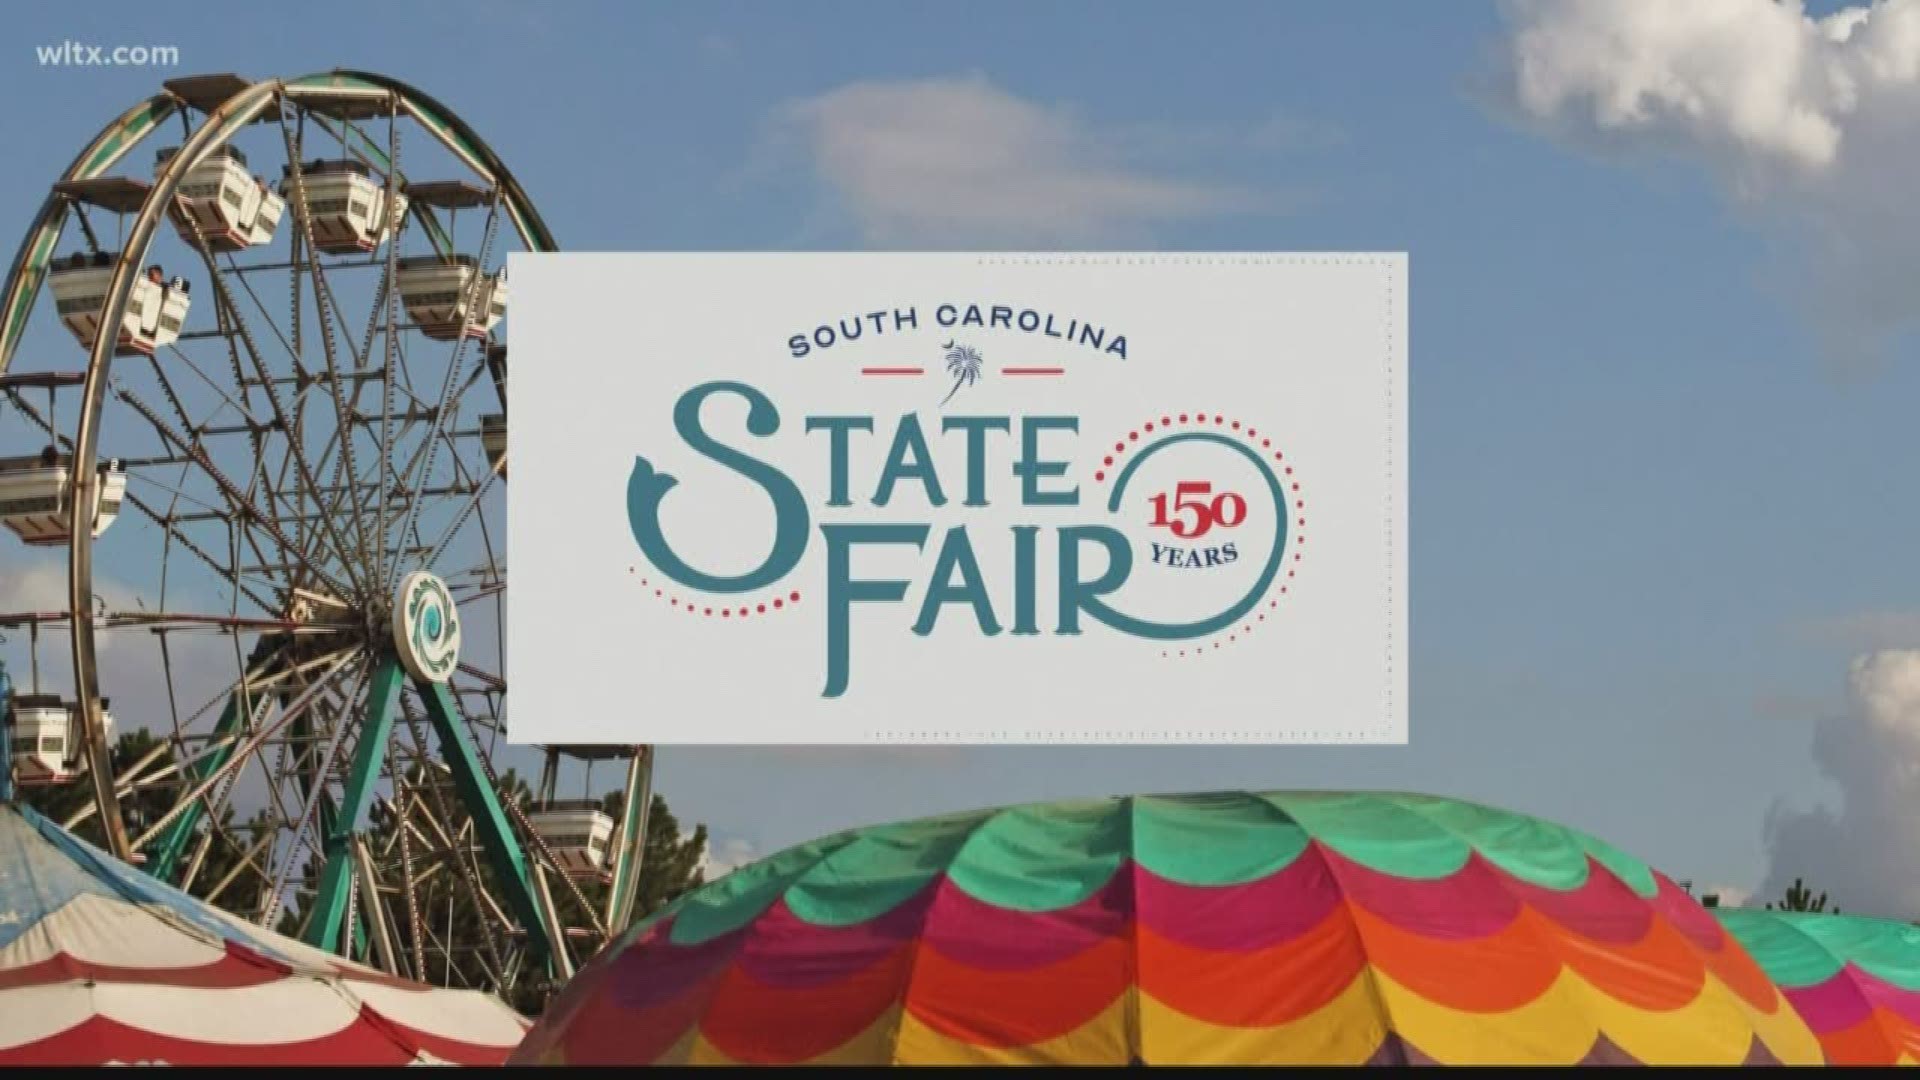 The 150th SC State Fair has come and gone but over the past 12 days hundreds of thousands of people made their way to the Fairgrounds.